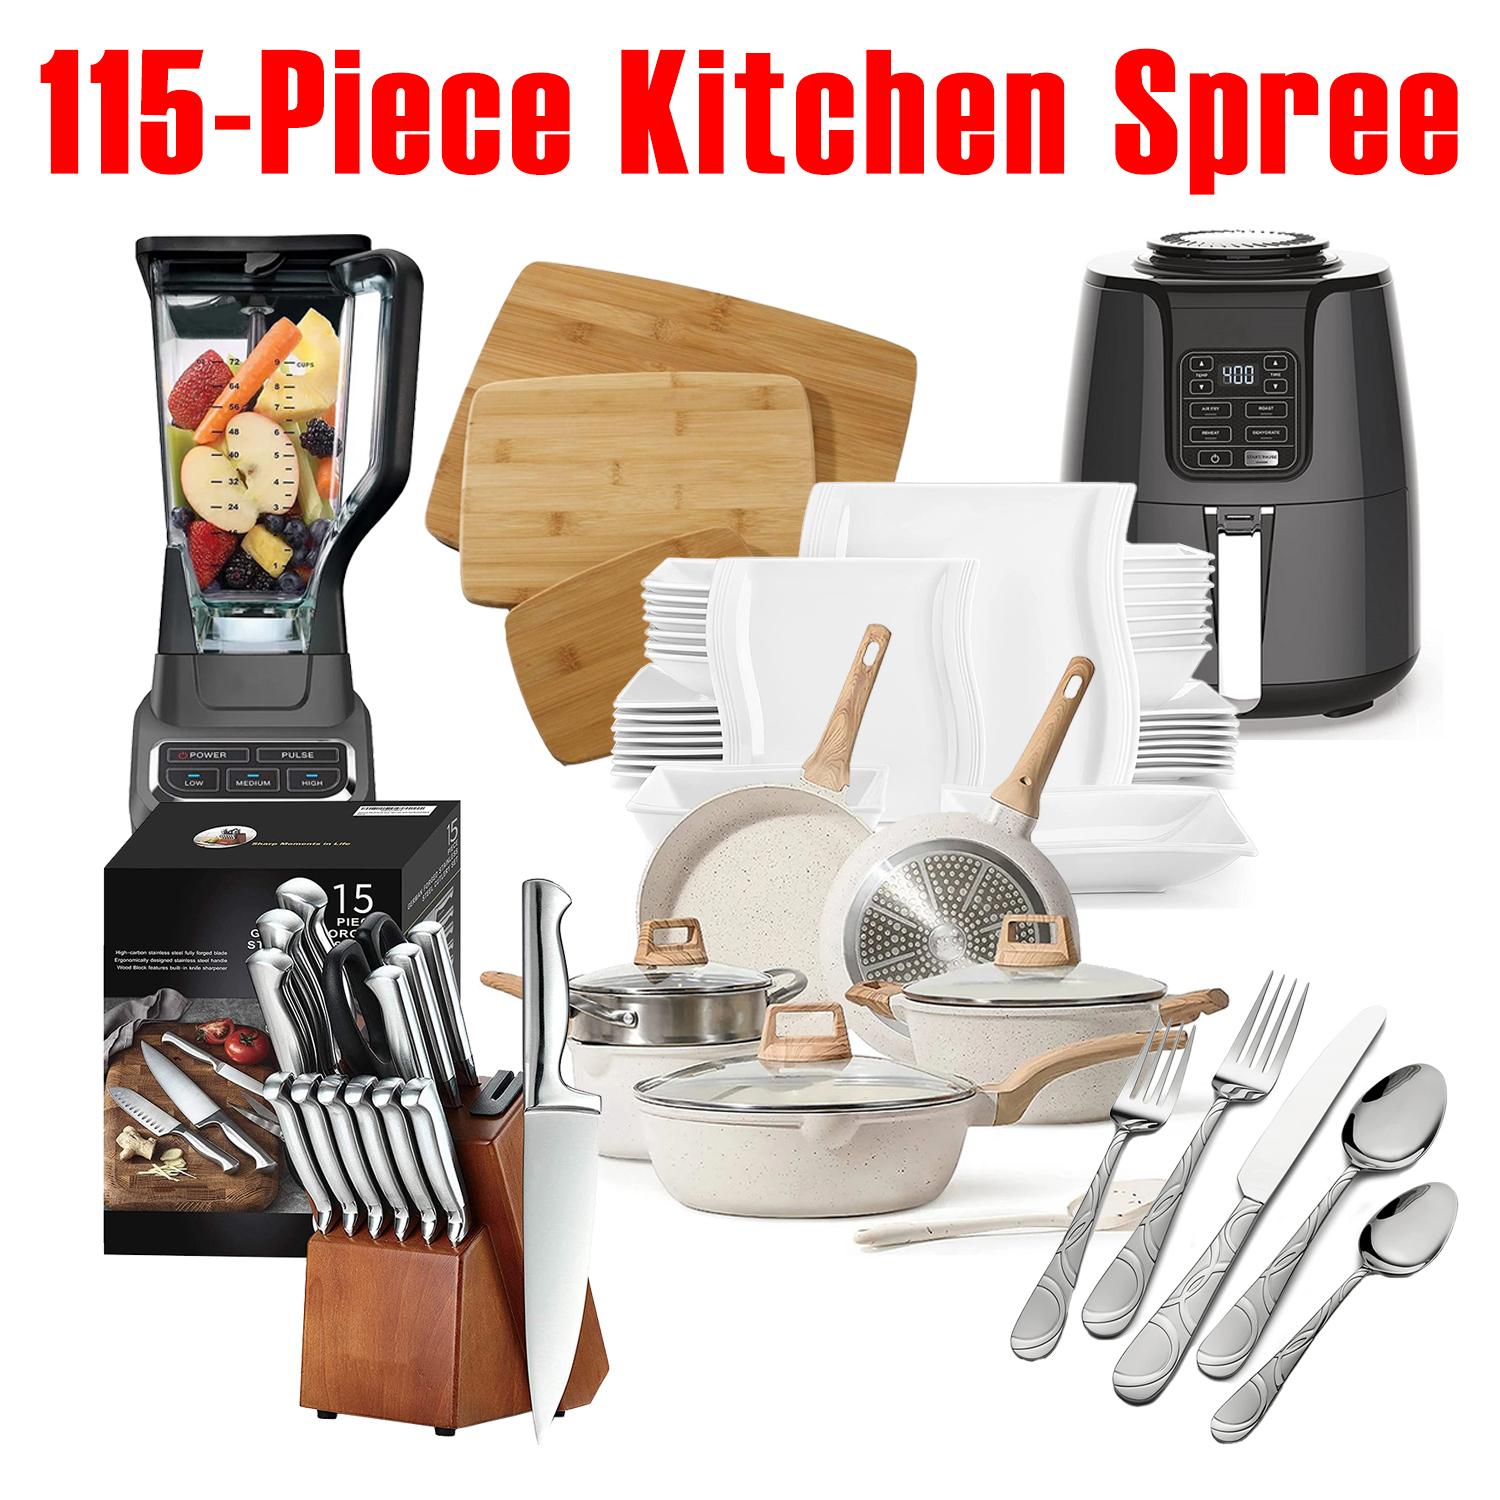 Limited-time Promotion, 115-piece Kitchen Spree, Meeting All The Needs Of The Kitchen